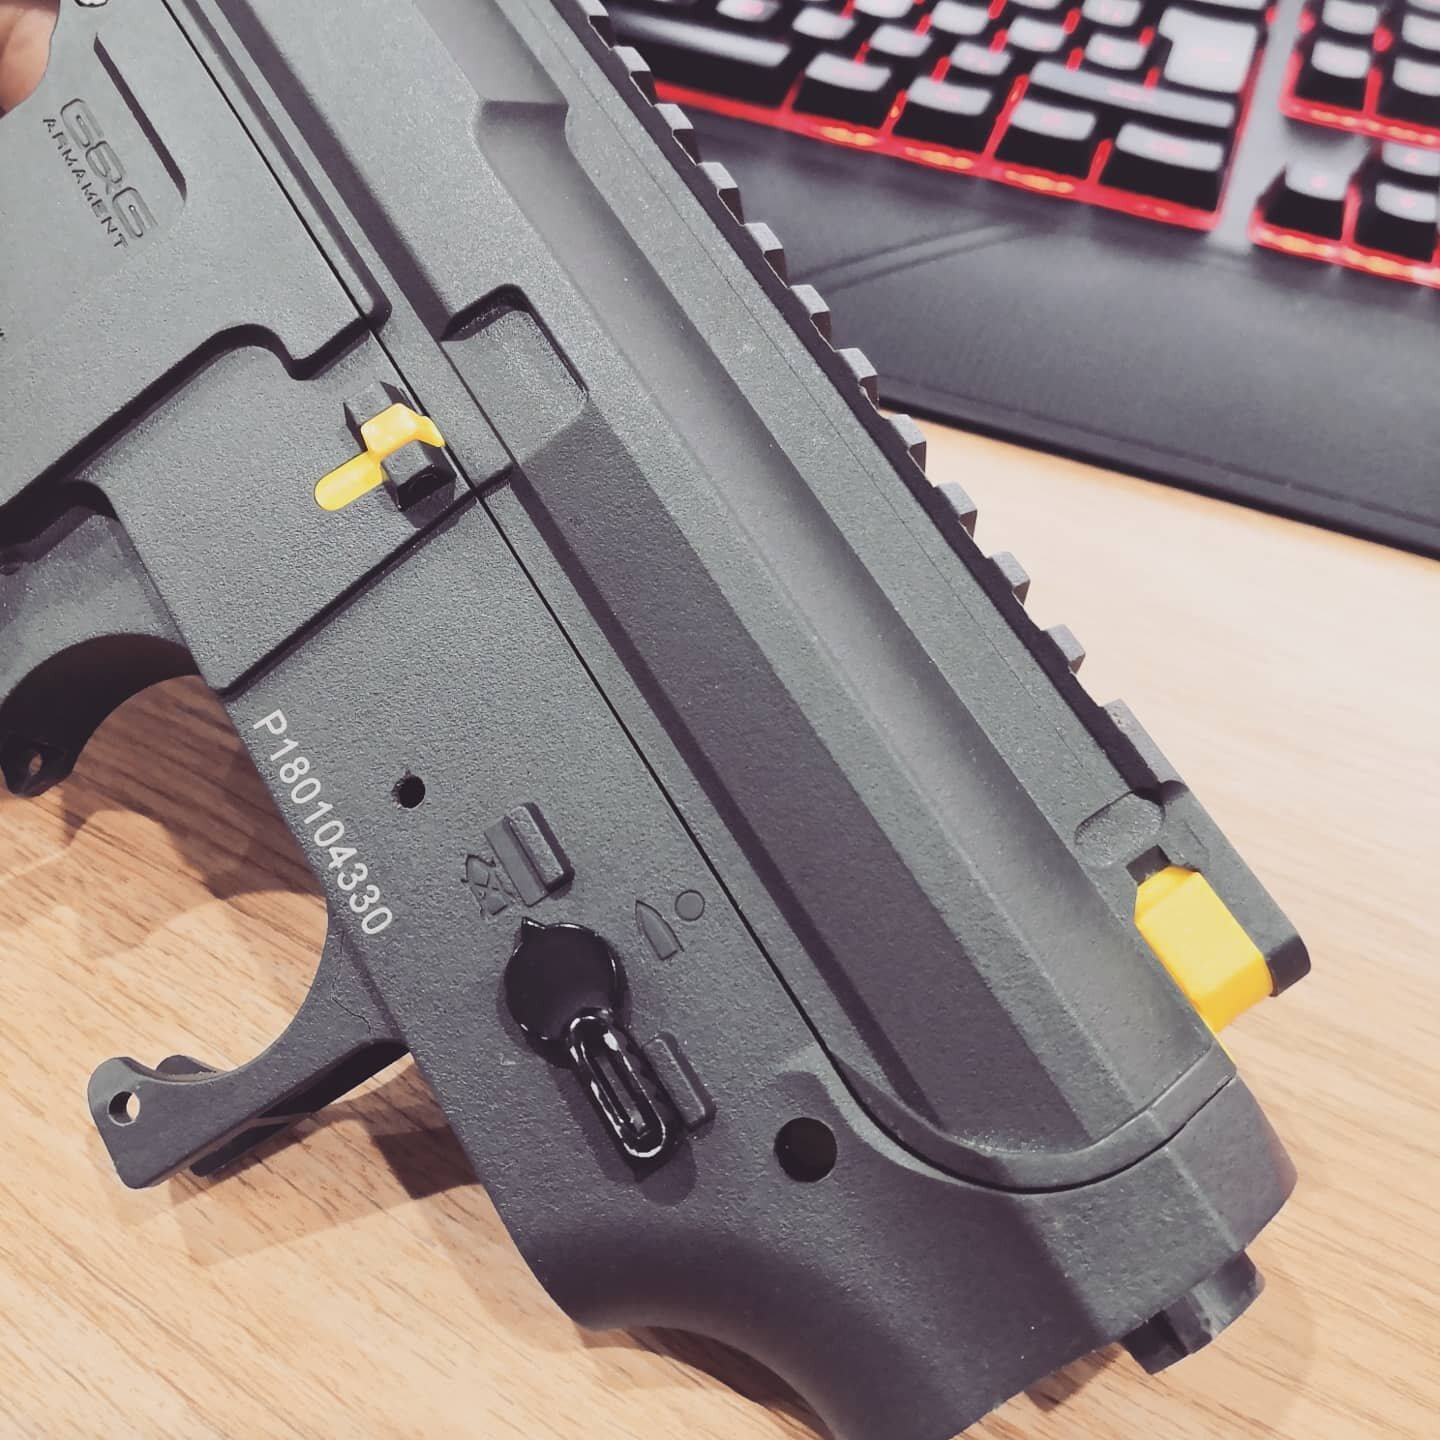 Our G&amp;G ARP-9 compatible blanking kit is now finally up for grabs. Designed to clean up builds where you have removed your charging handles and bolt release buttons. They may be compatible with other AEGs, but that has not been tested yet. 

Both